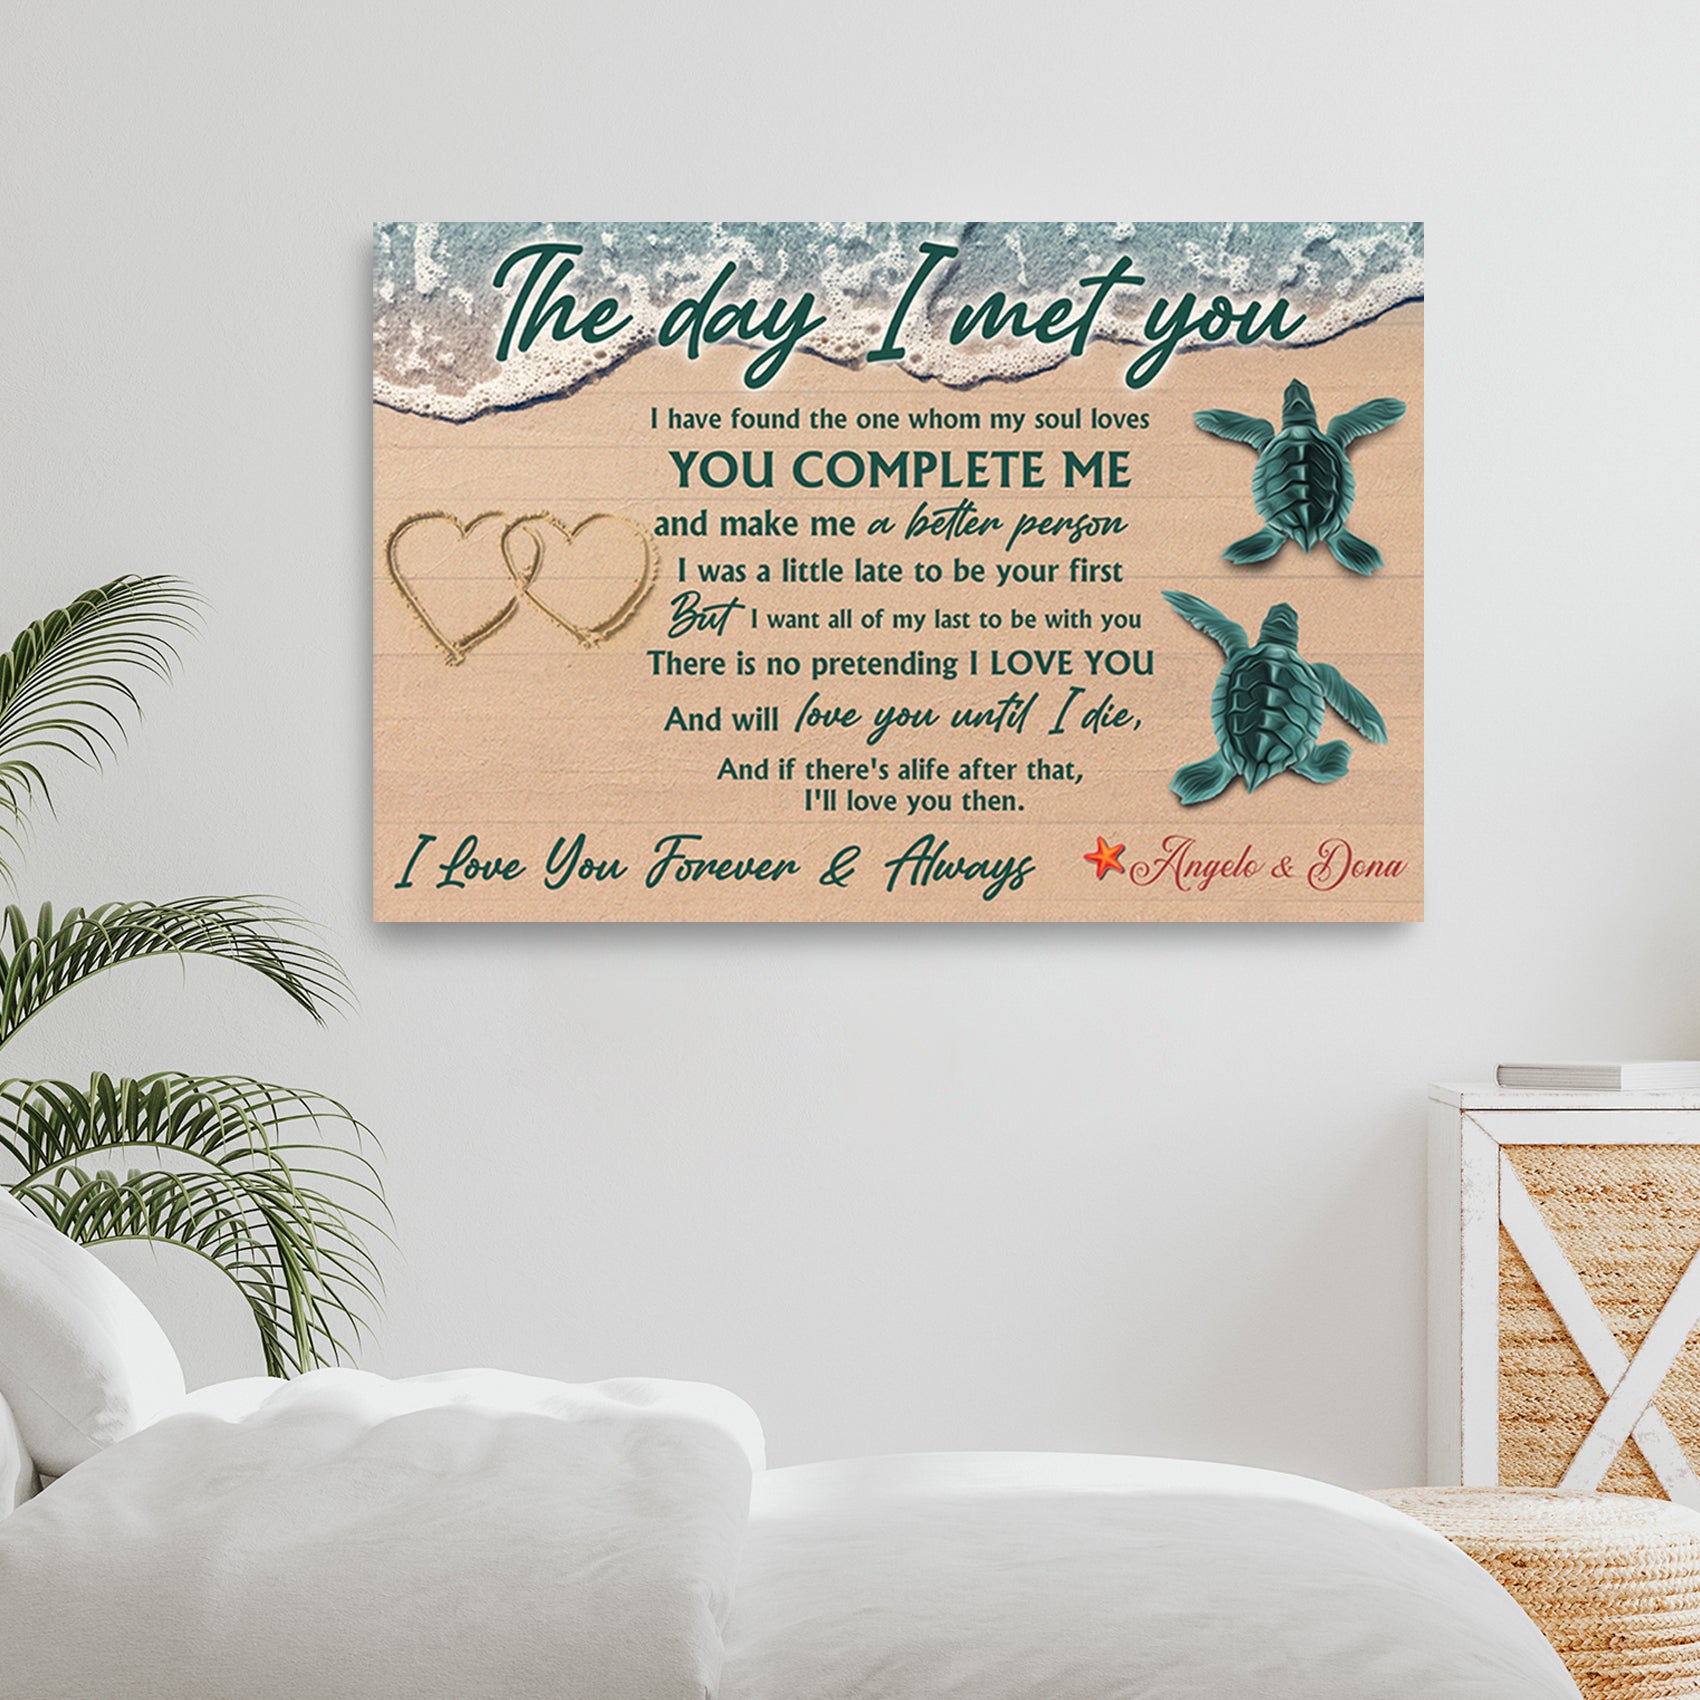 The Day I Met You Sign - Image by Tailored Canvases